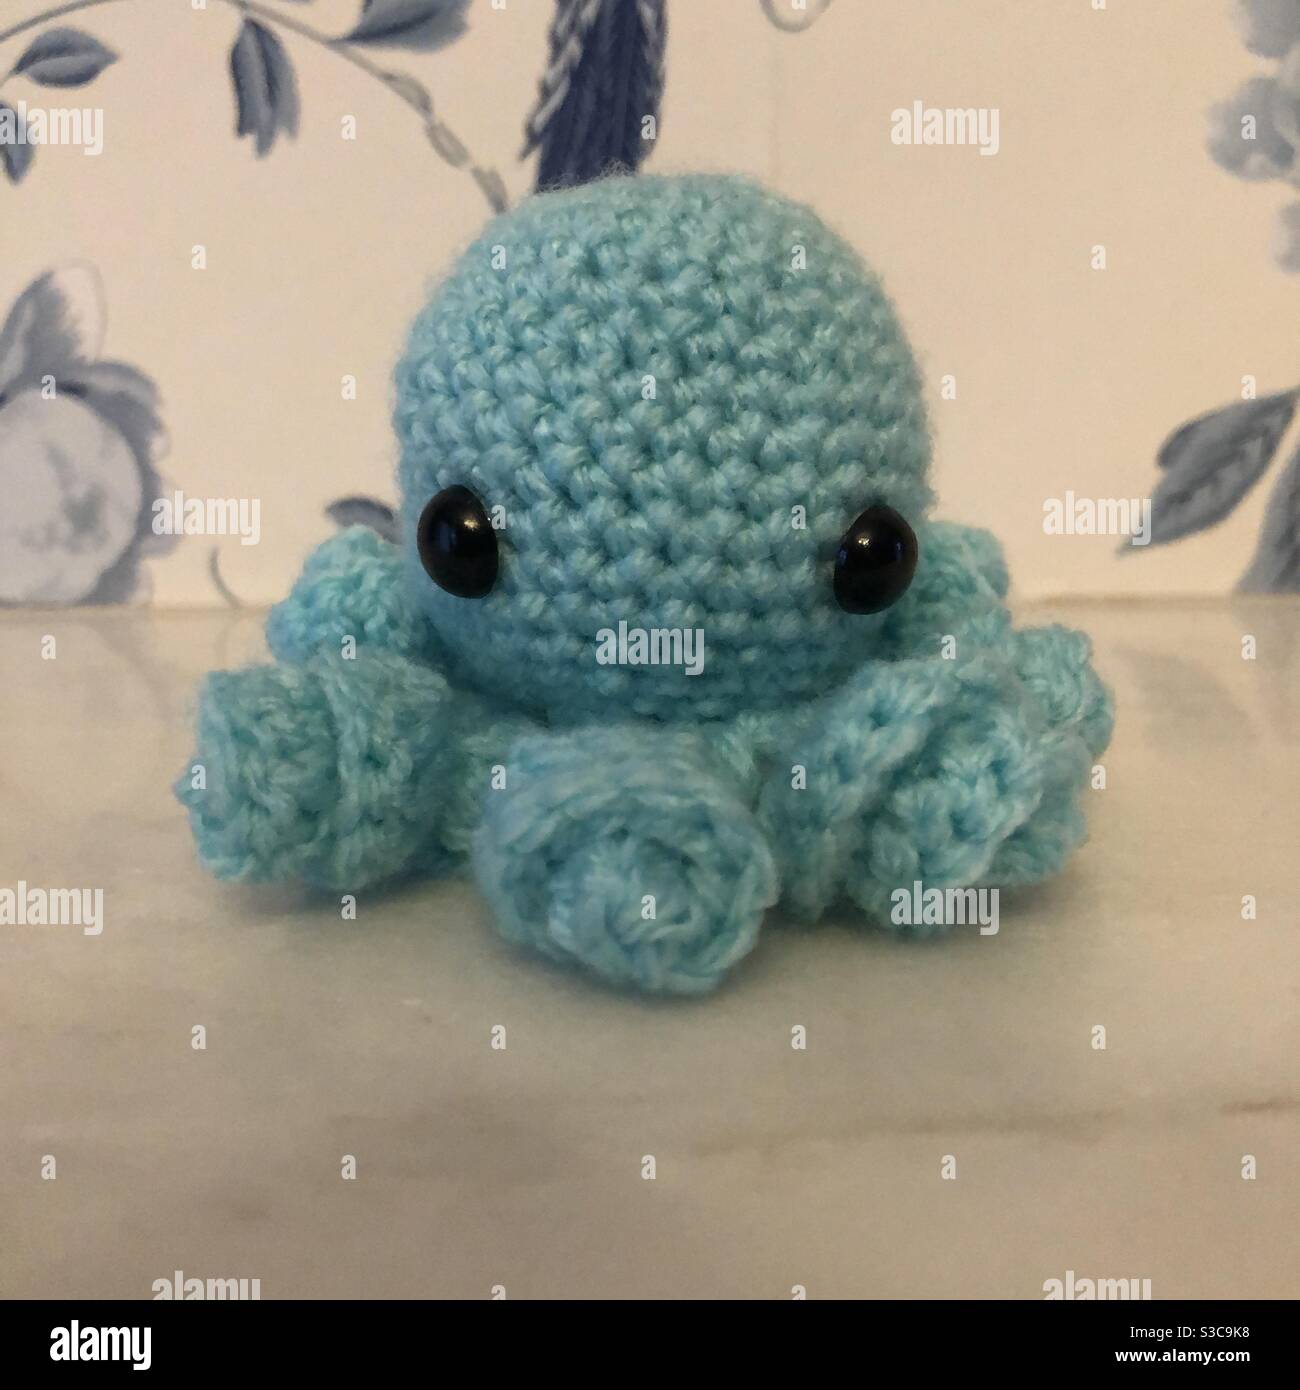 Teal coloured crochet octopus toy Stock Photo